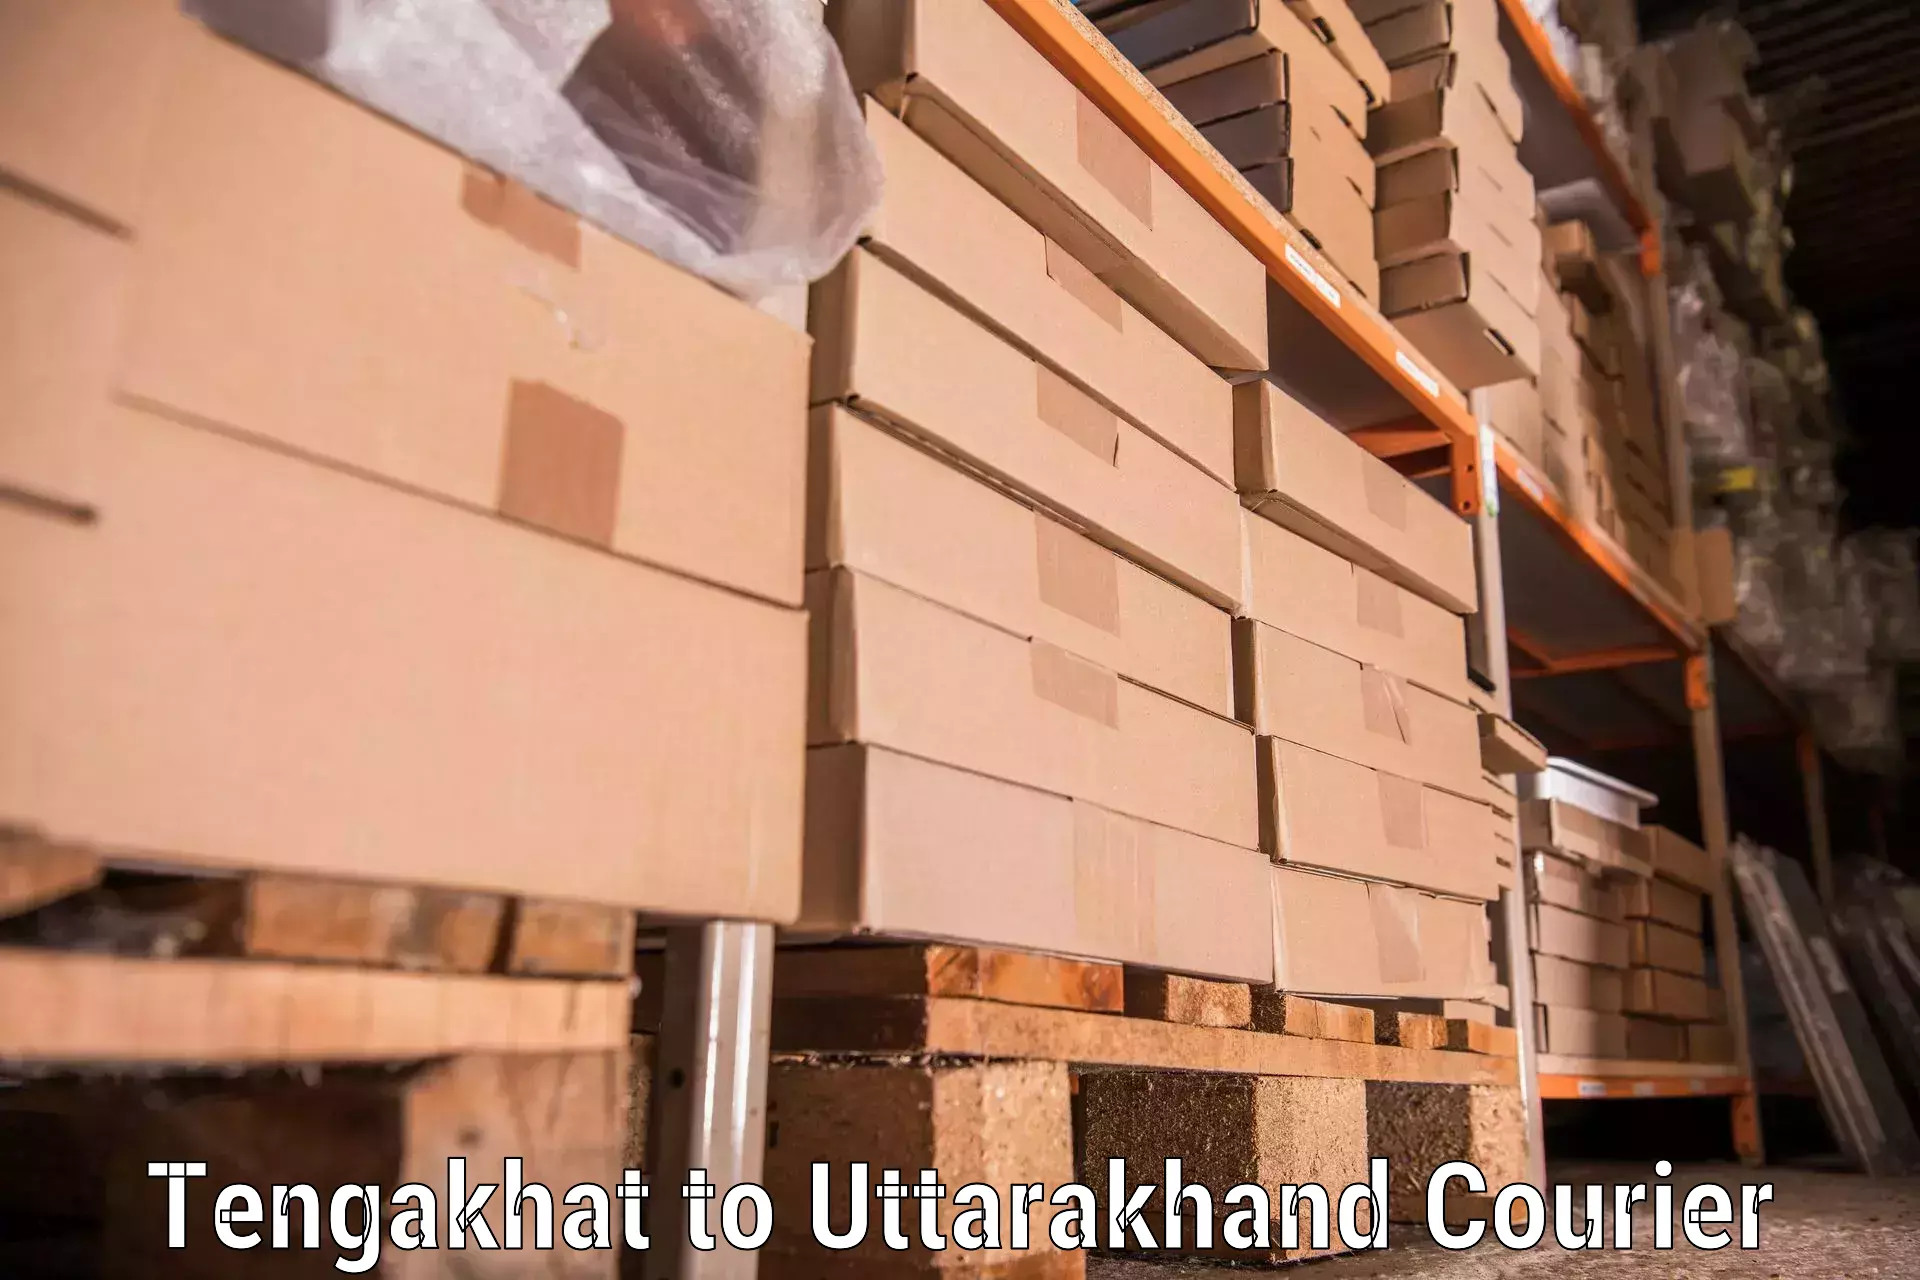 Furniture transport company Tengakhat to Mussoorie